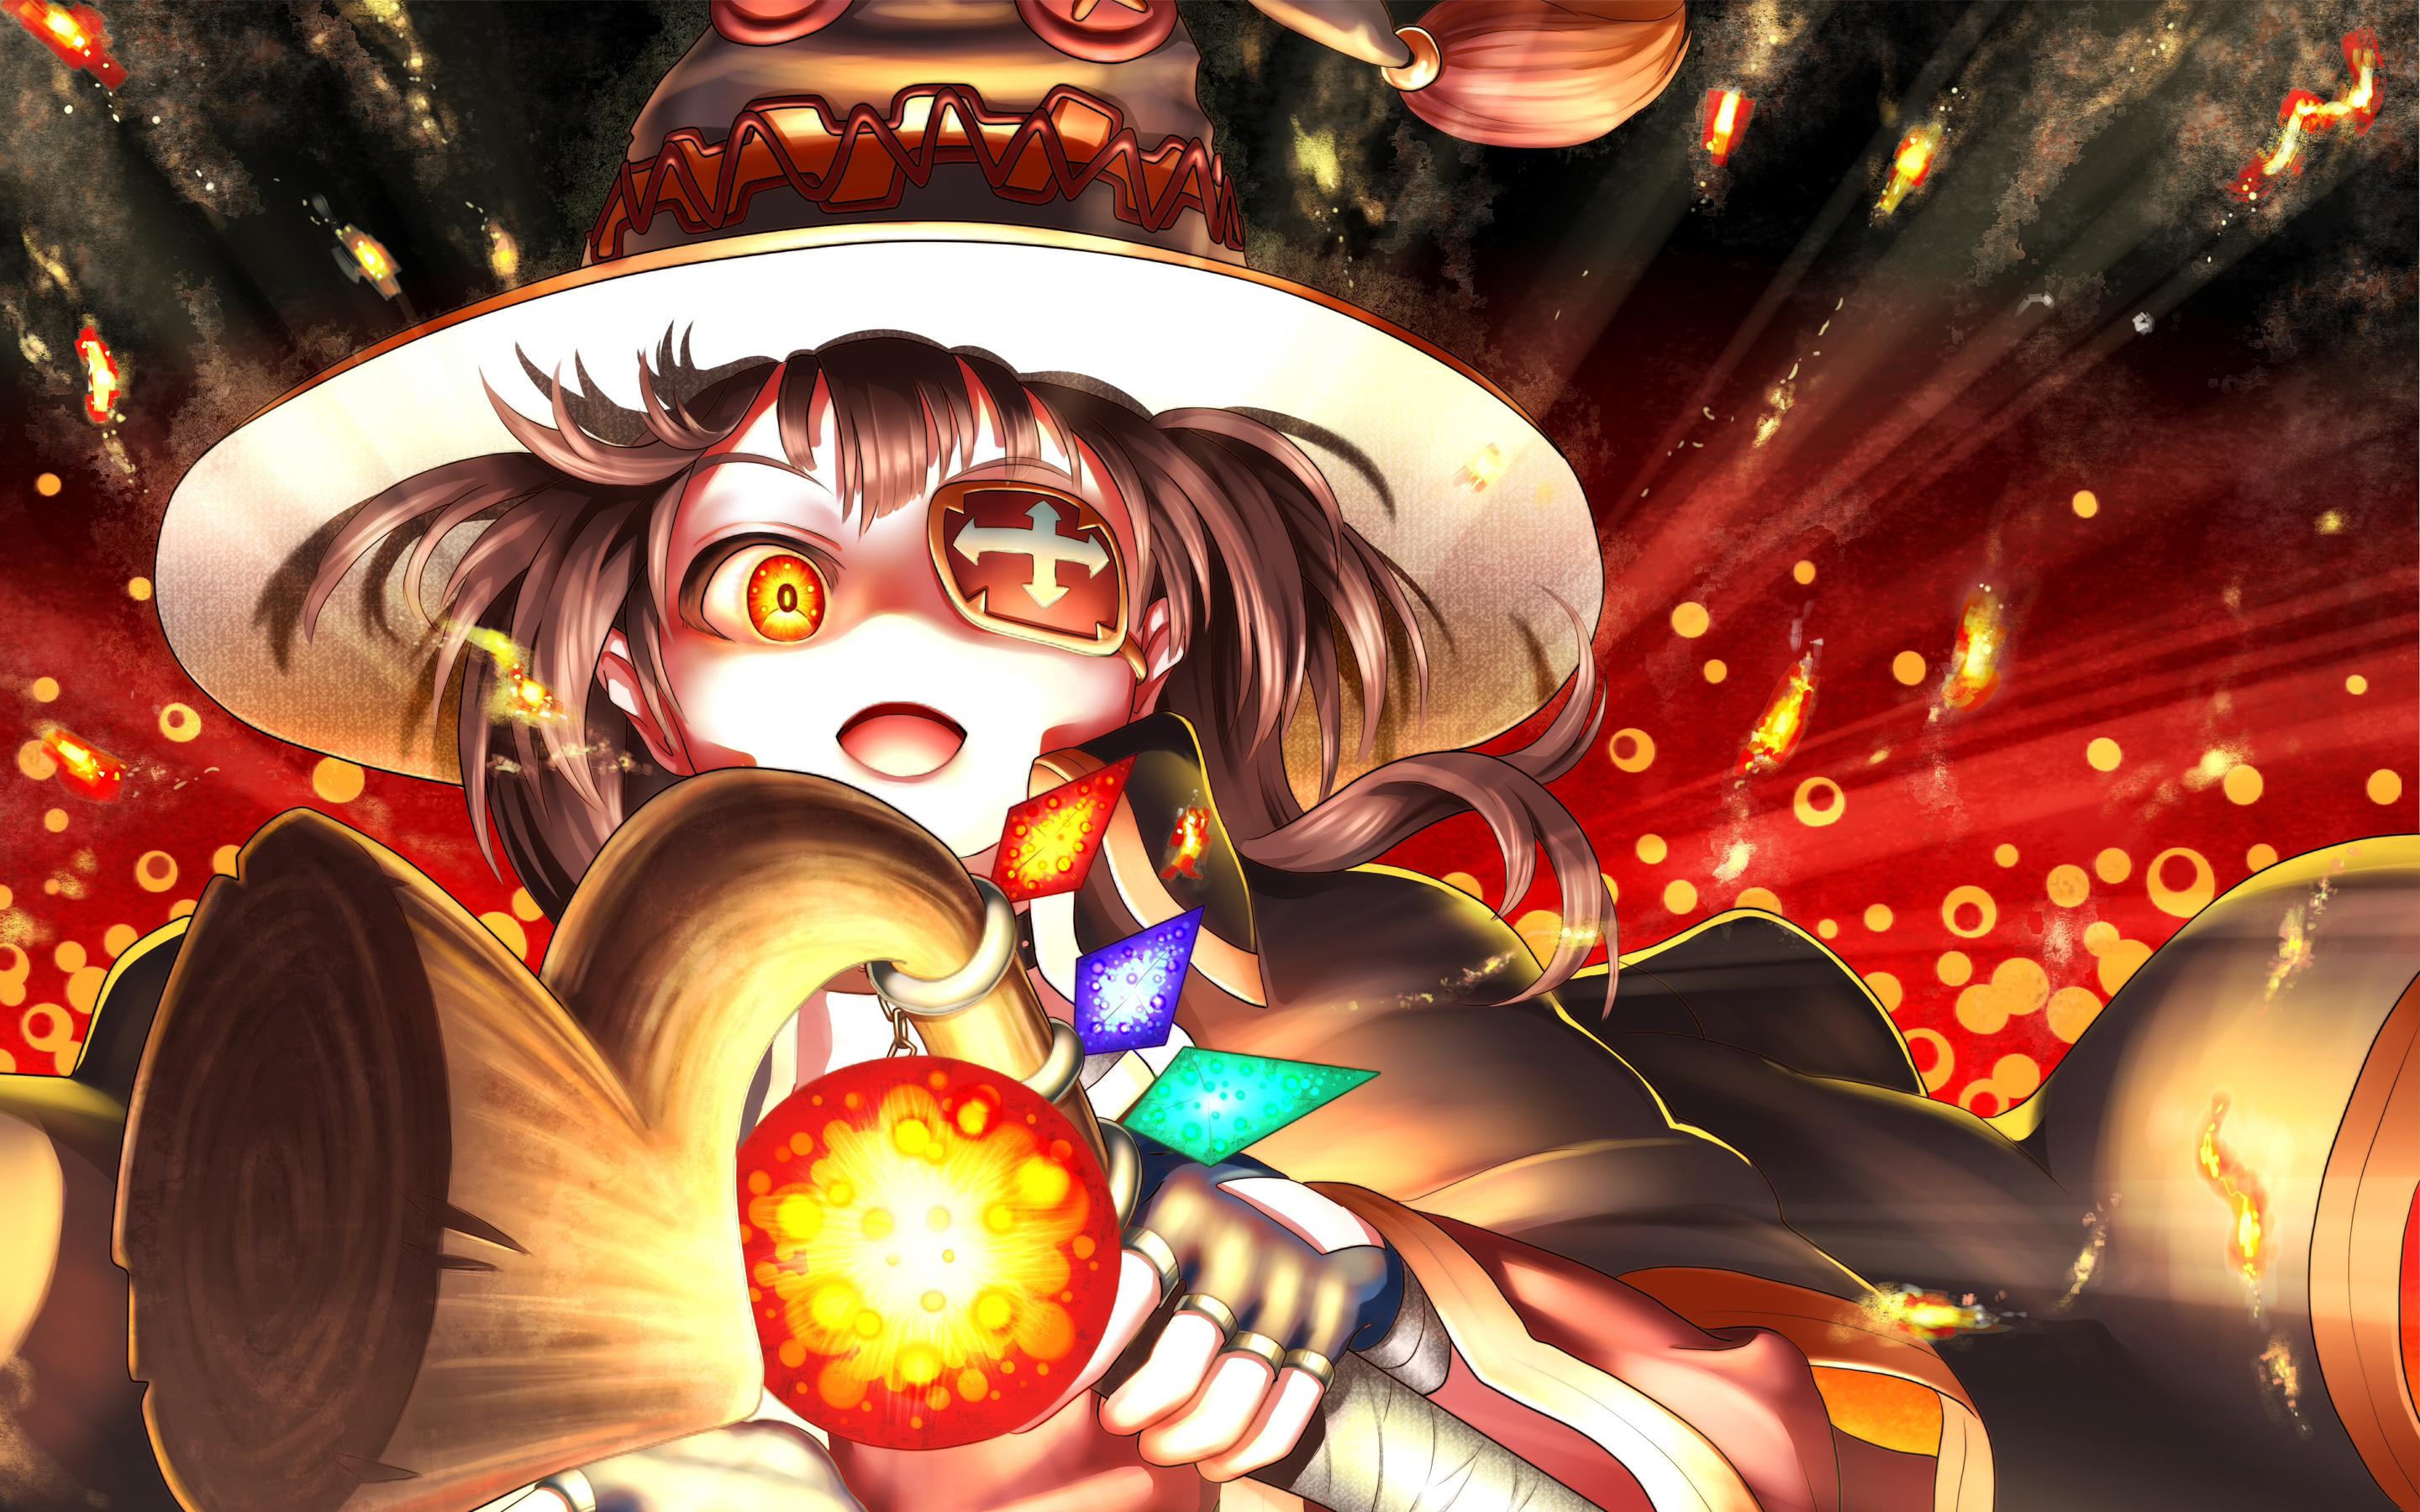 Megumin k wallpapers for your desktop or mobile screen free and easy to download